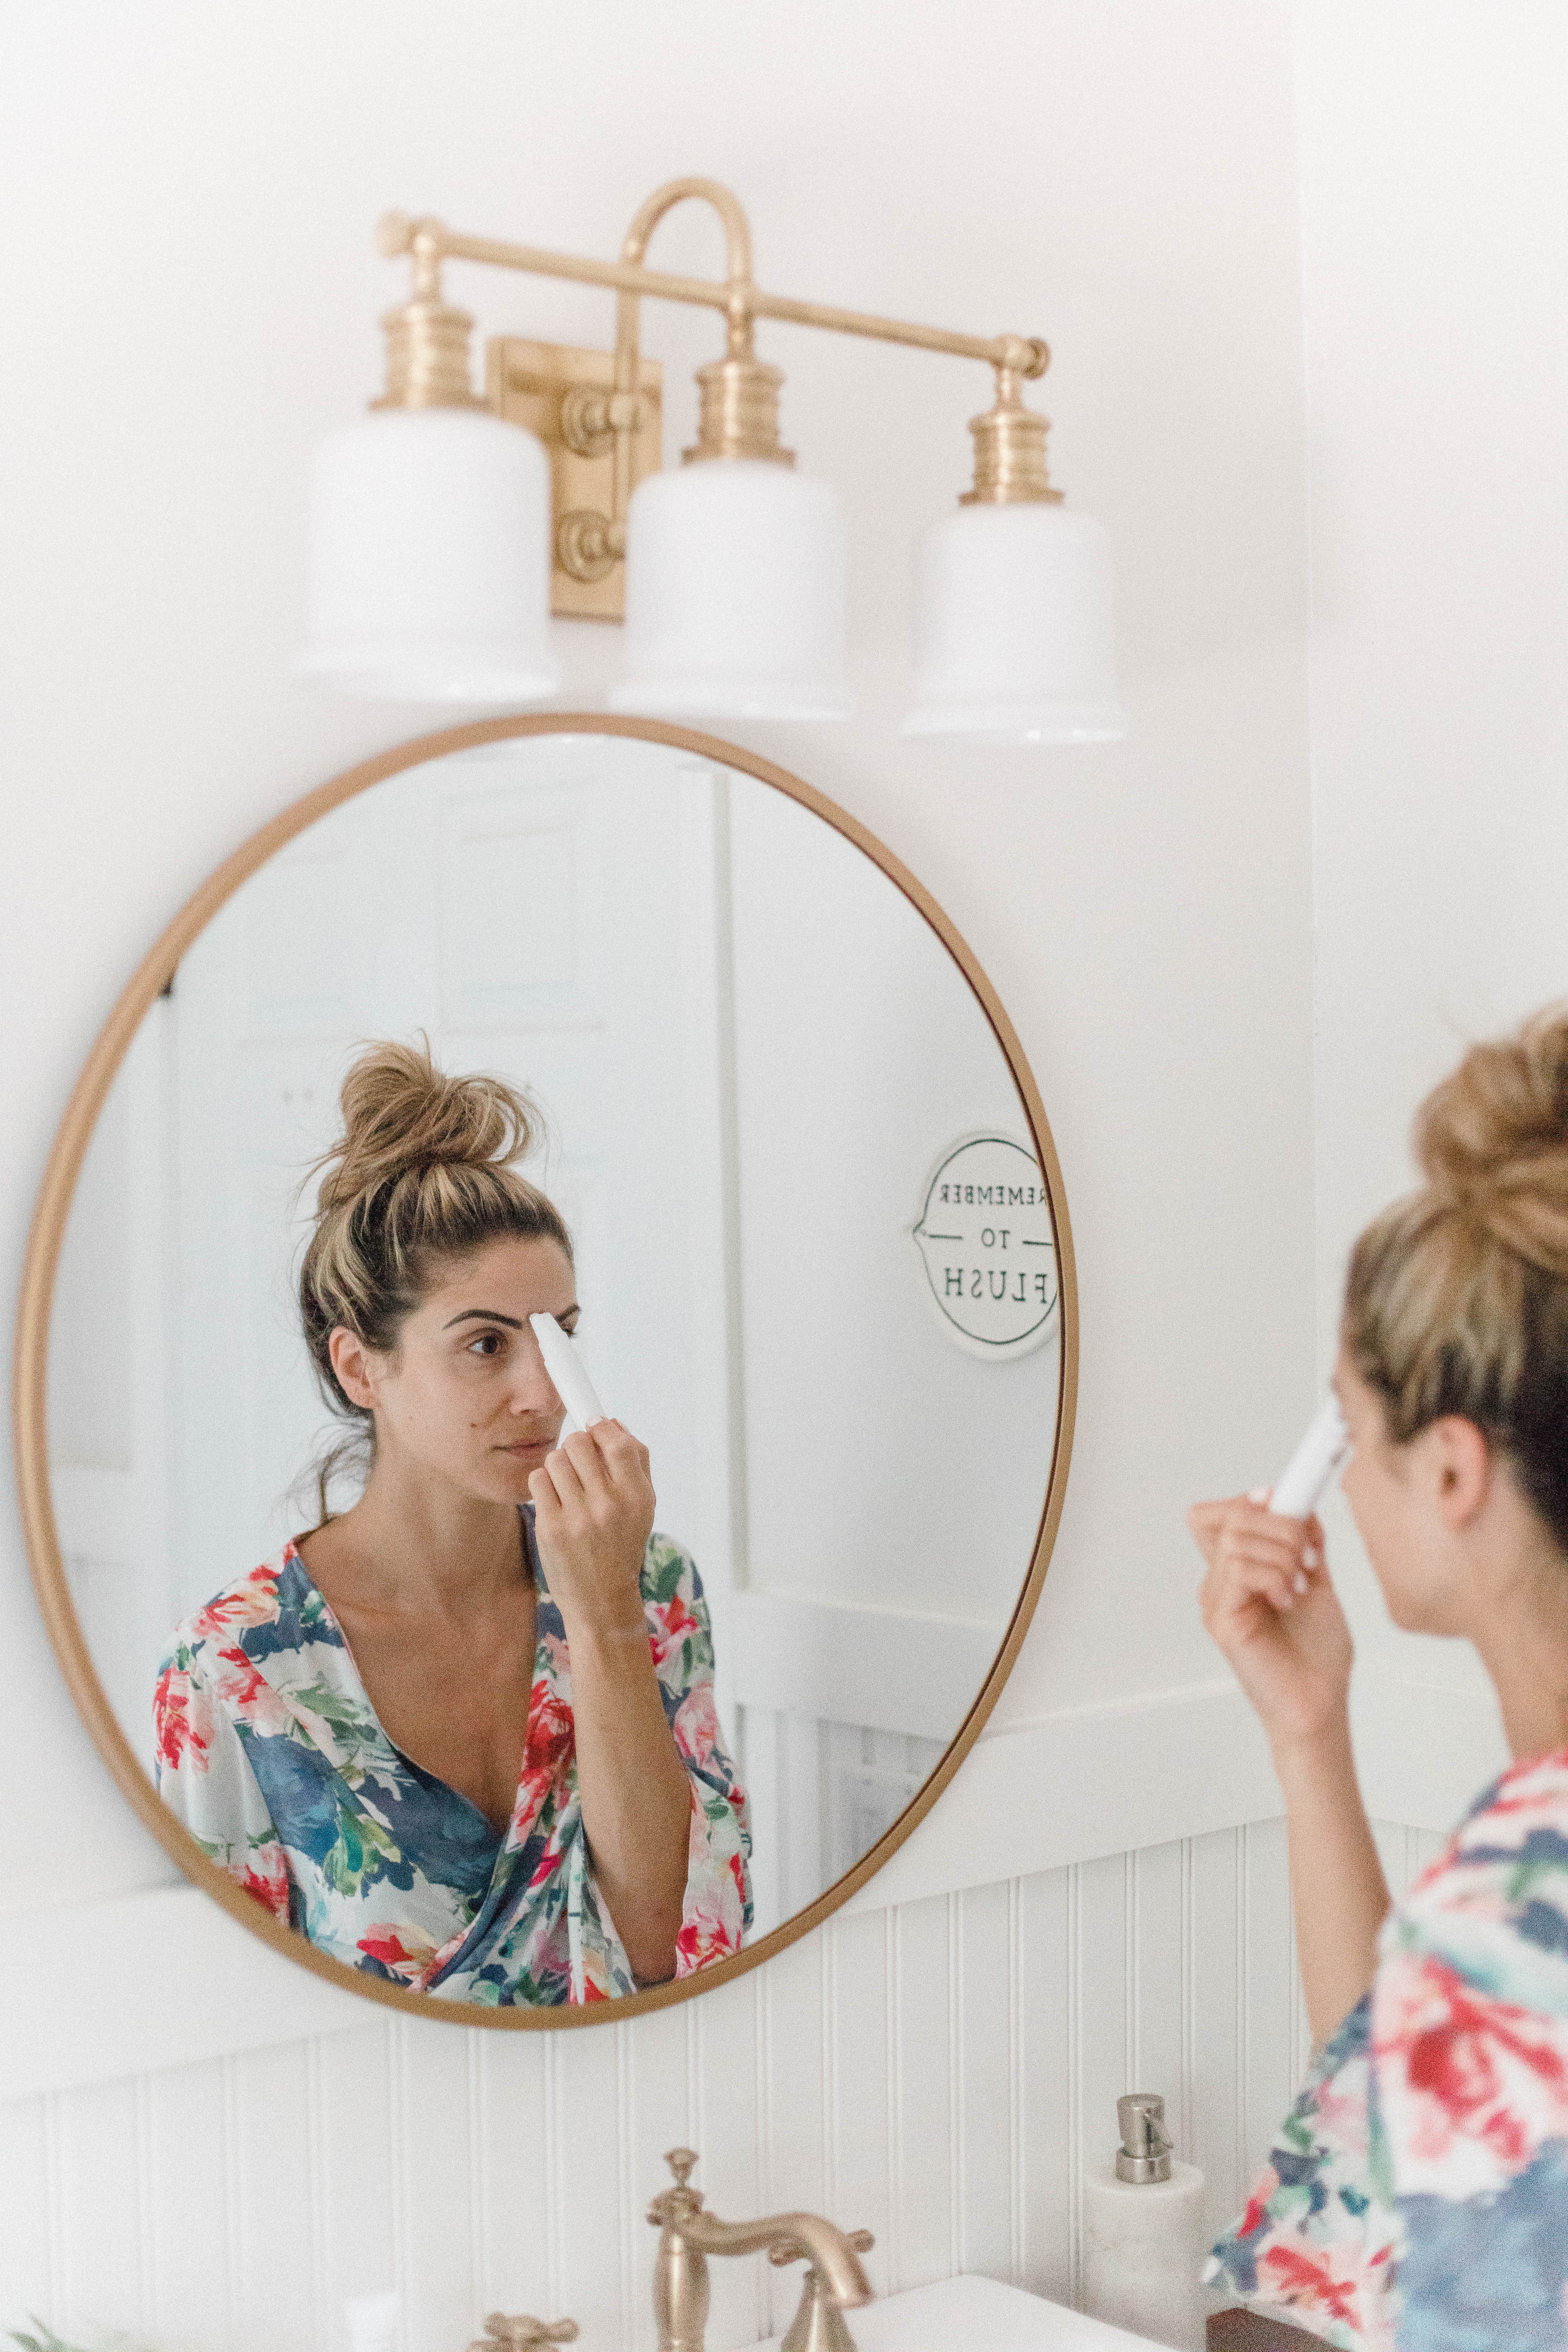 Connecticut life and style blogger Lauren McBride shares how to use the NuFACE FIX and benefits of microcurrent therapy.